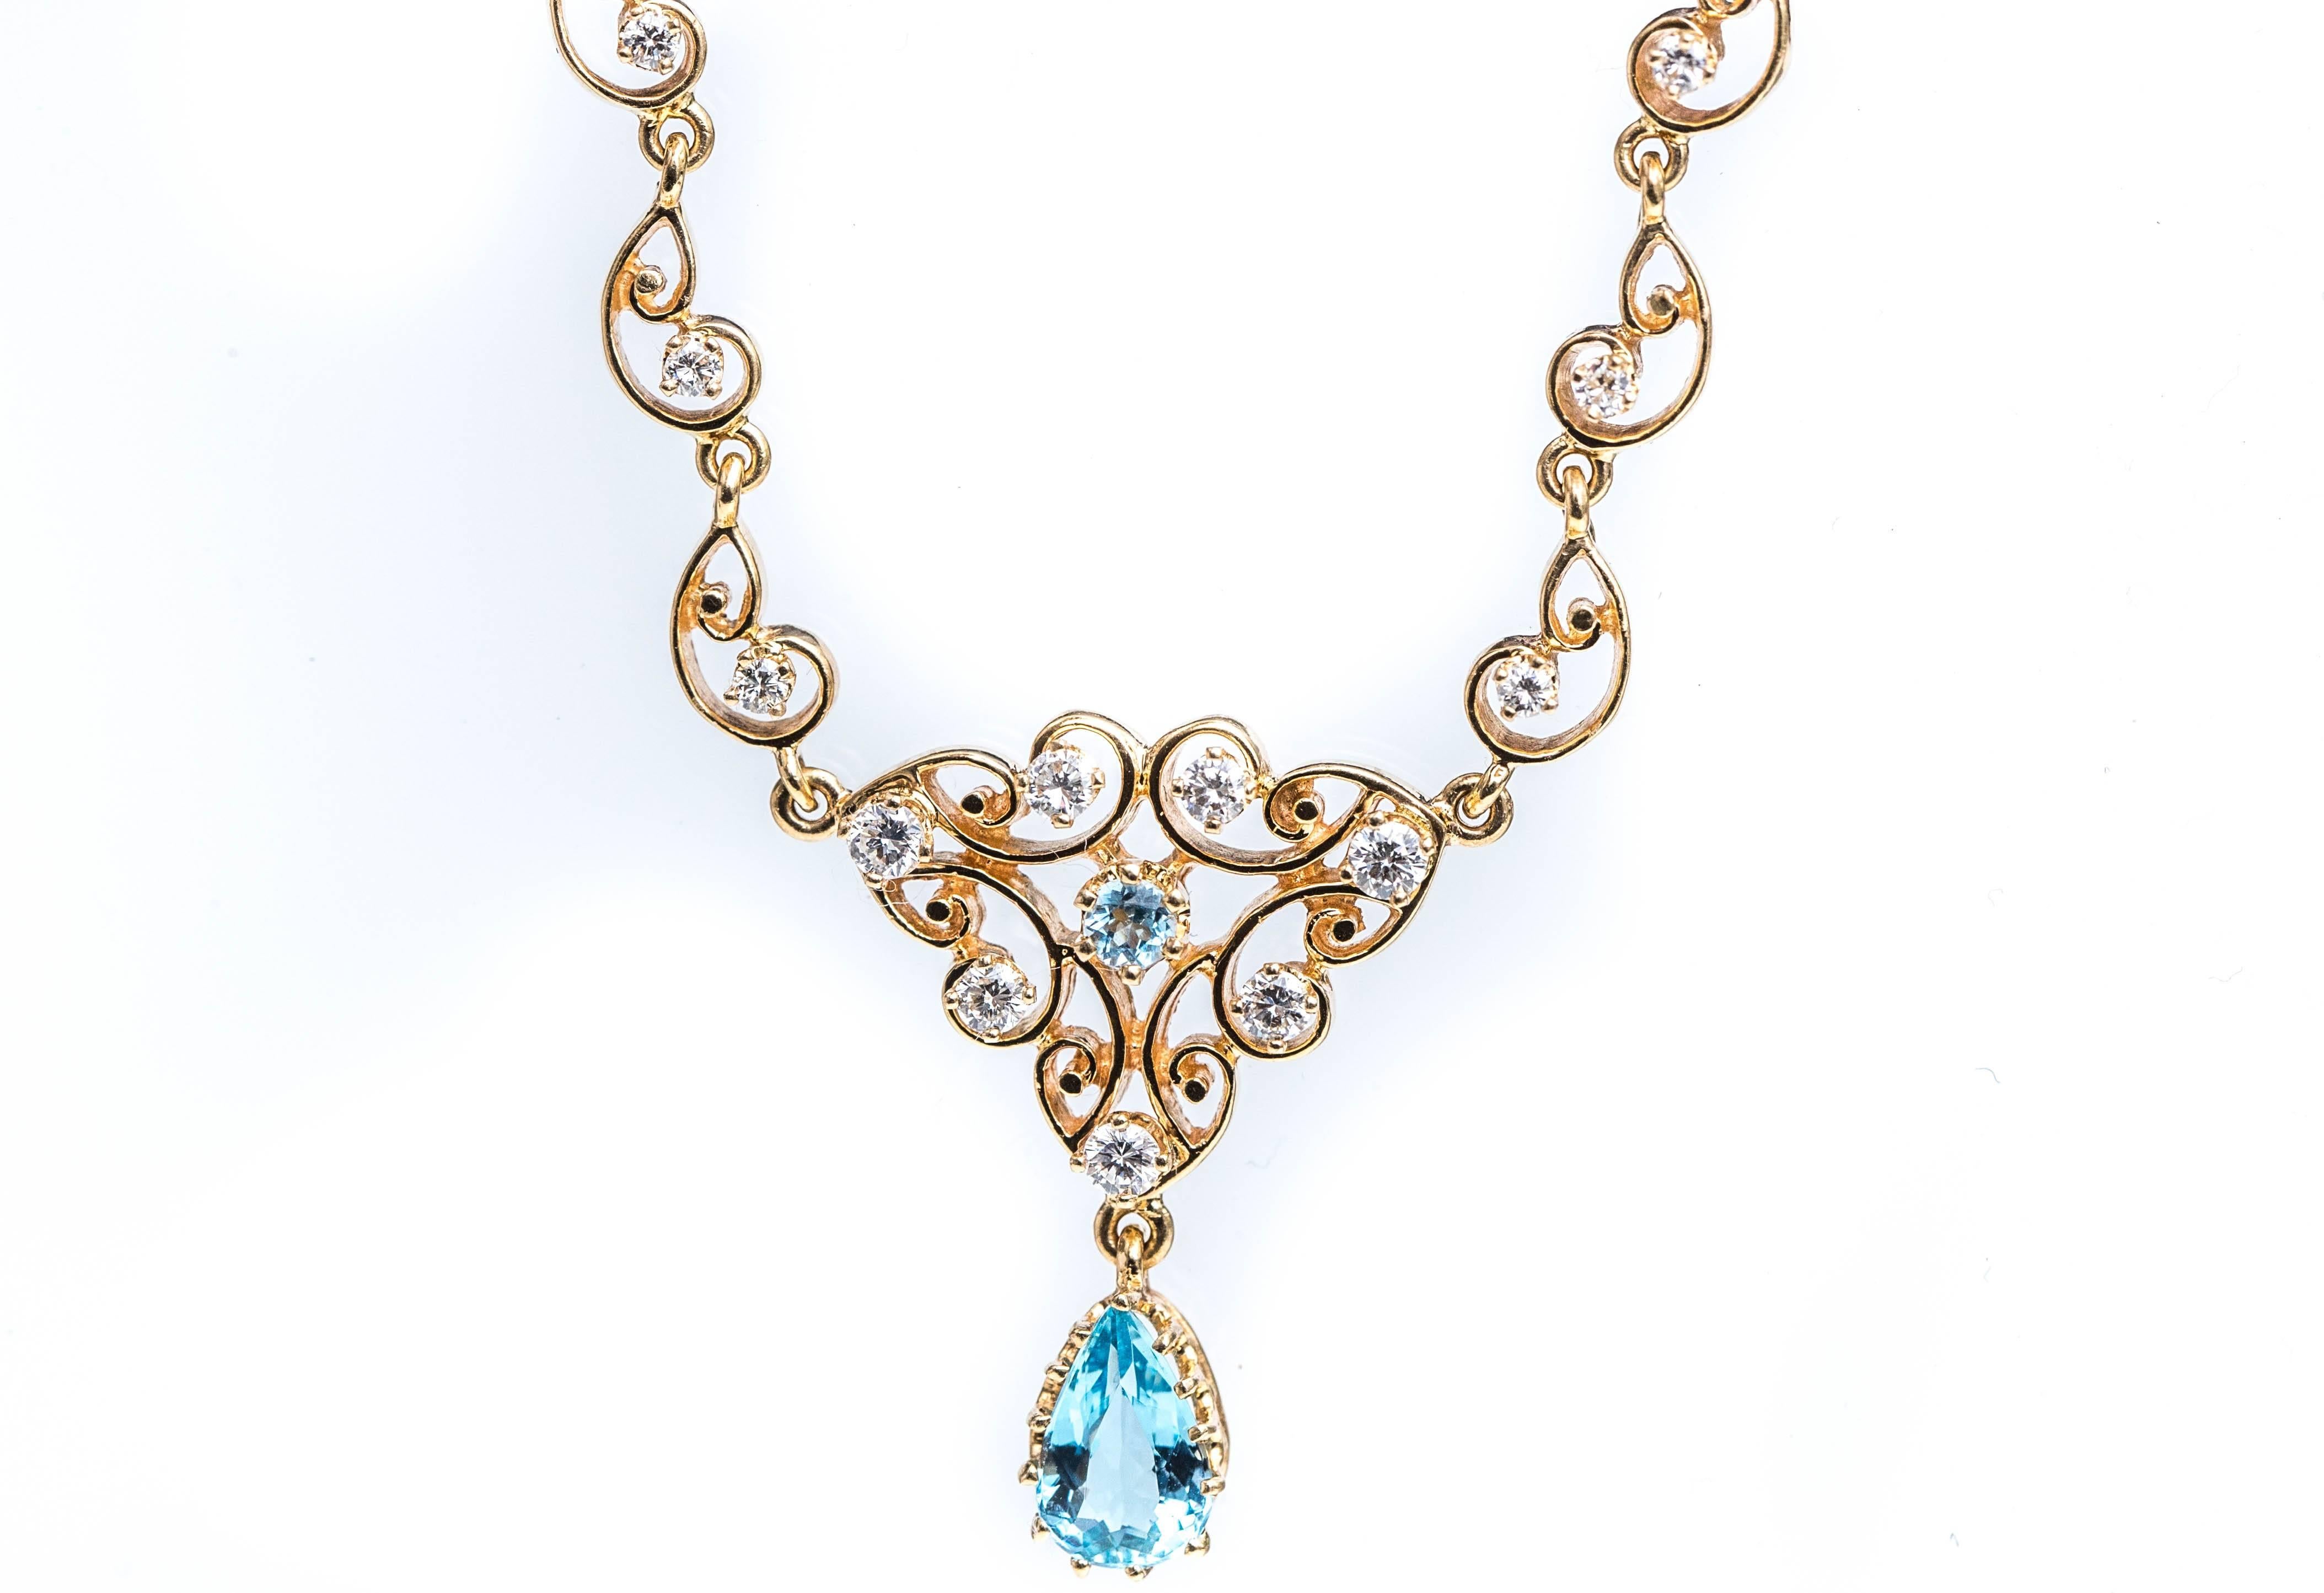 1950s Aquamarine, Diamond and 14 Carat Yellow Gold Necklace

Features a Victorian style-inspired design, 13 Round Brilliant Diamonds and a Pear shaped Aquamarine Charm. 

The V-shaped necklace center piece has a center set, round Aquamarine